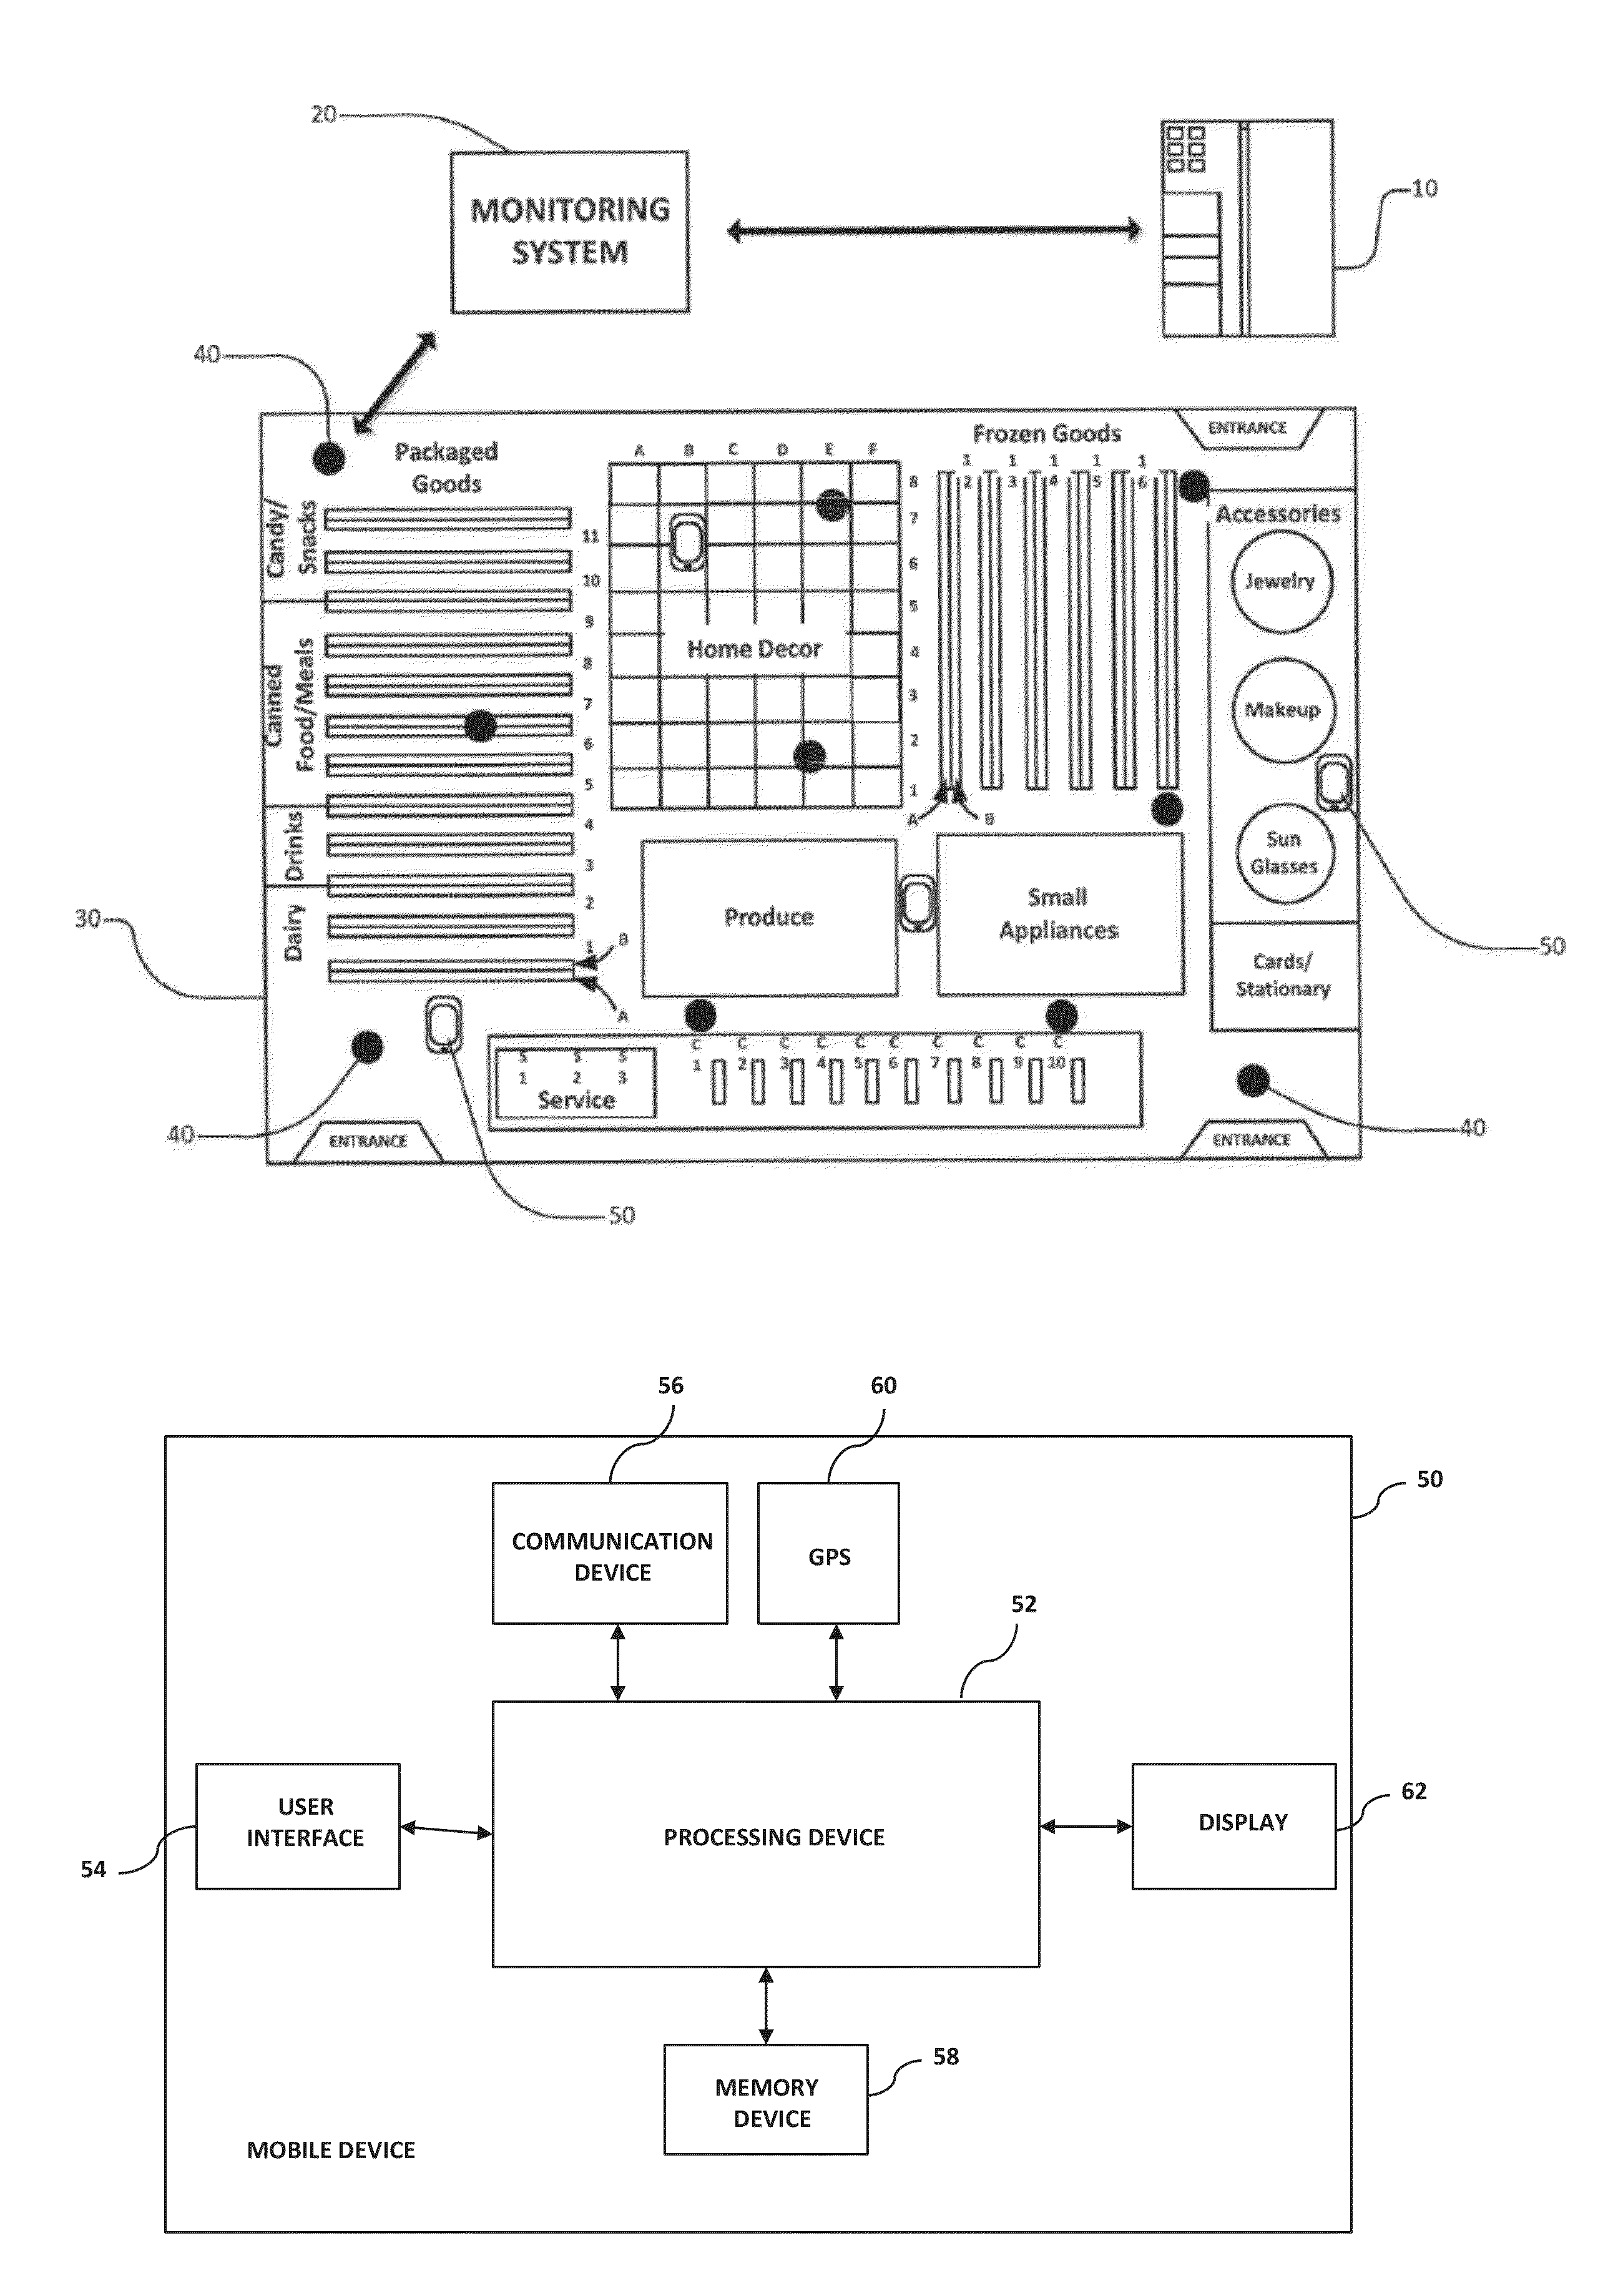 Systems and methods for generating and using a heat map of a retail location to reduce overcrowding